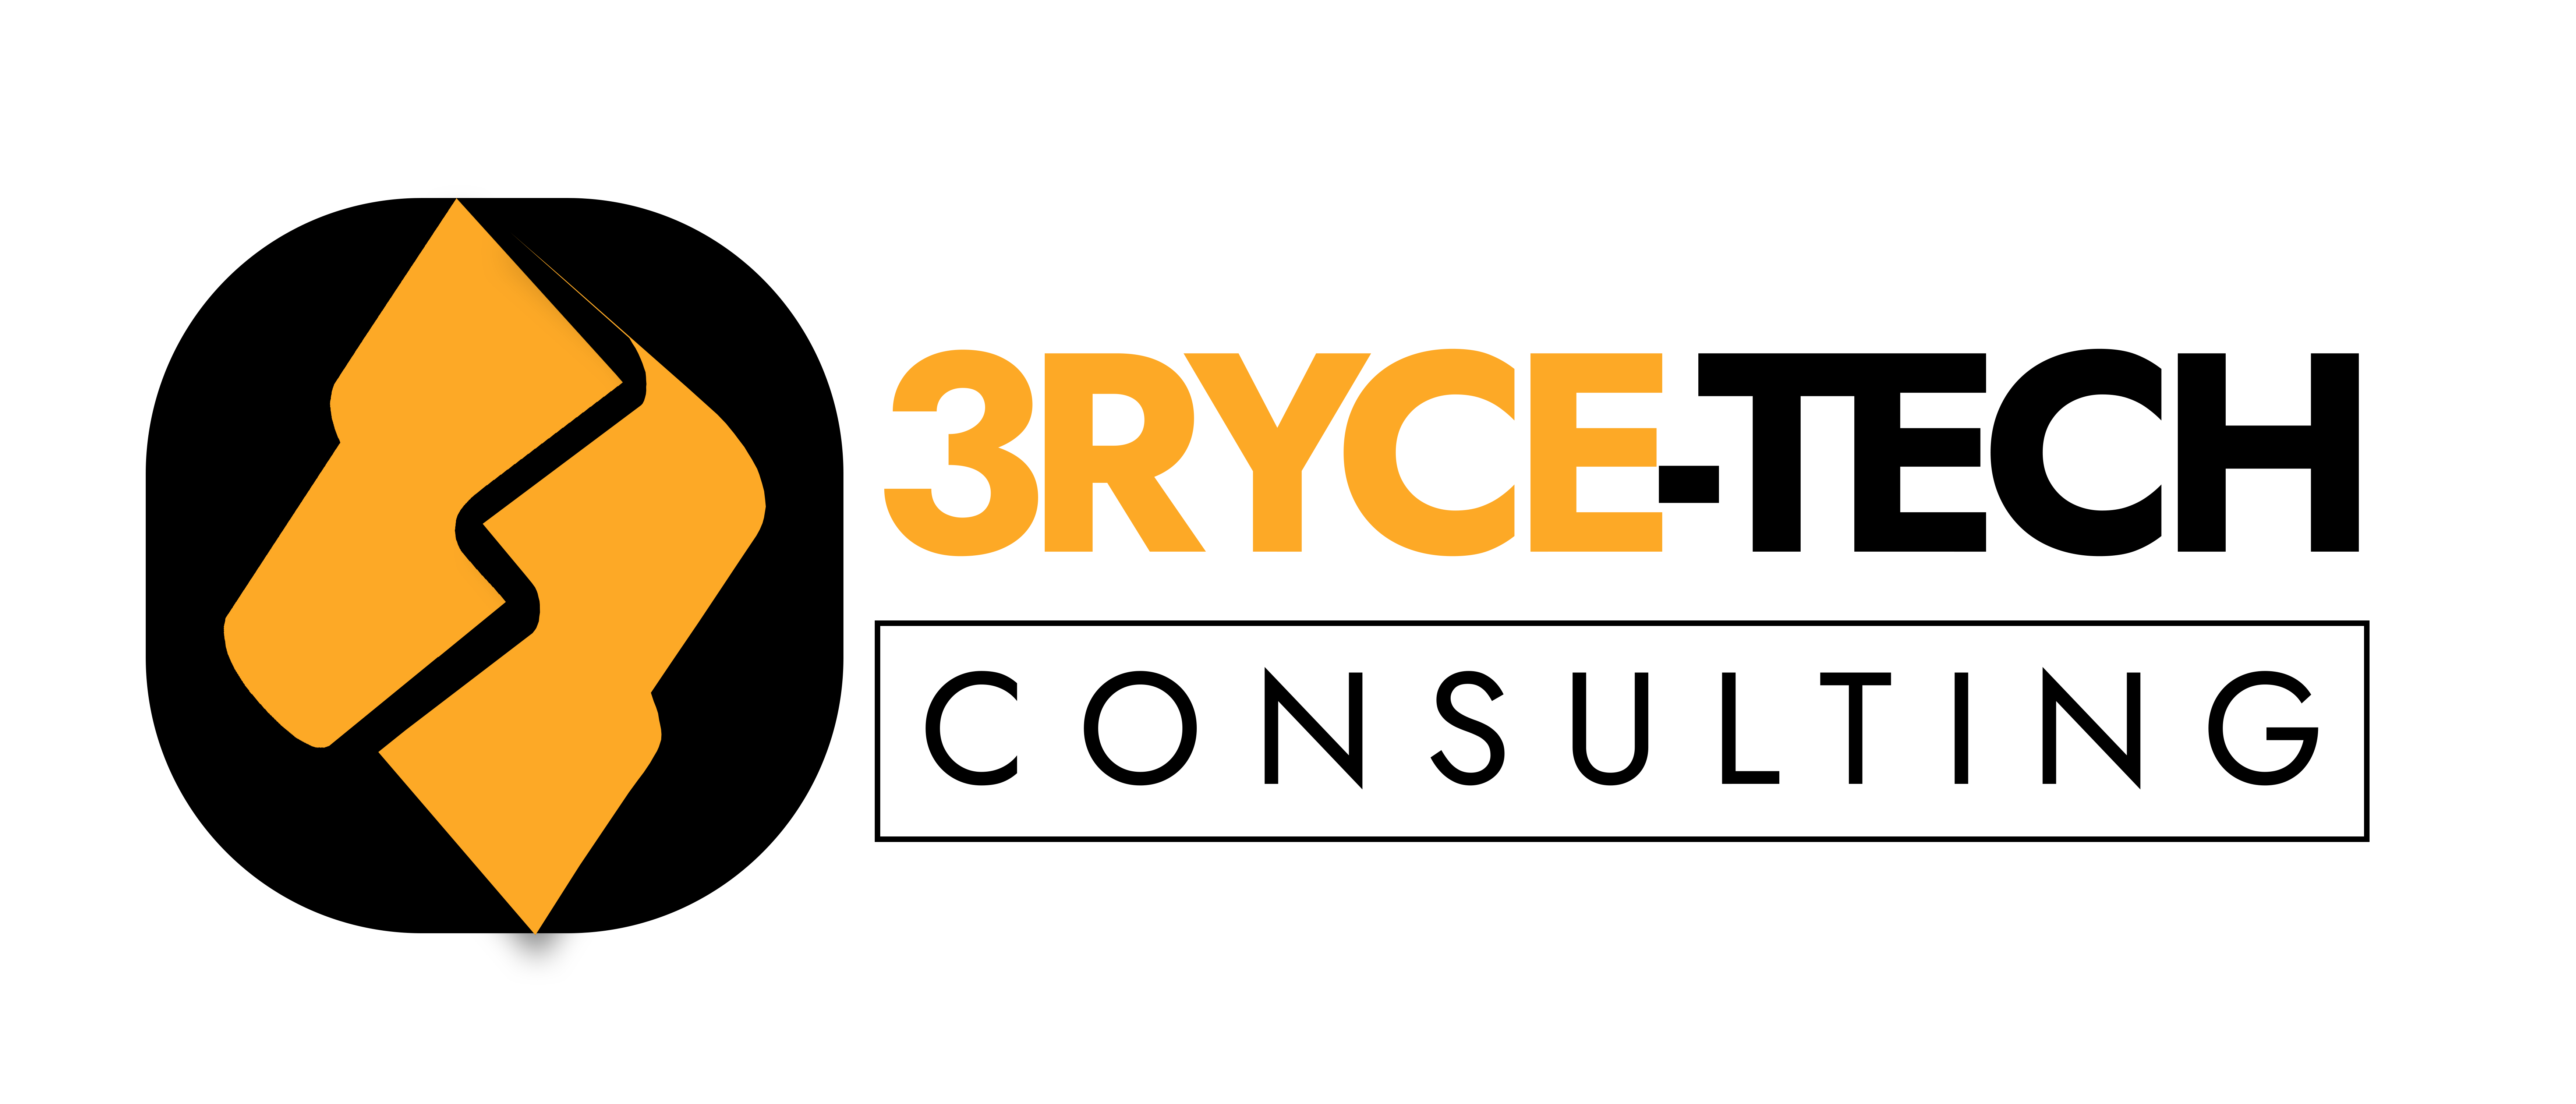 3ryce Tech Consulting